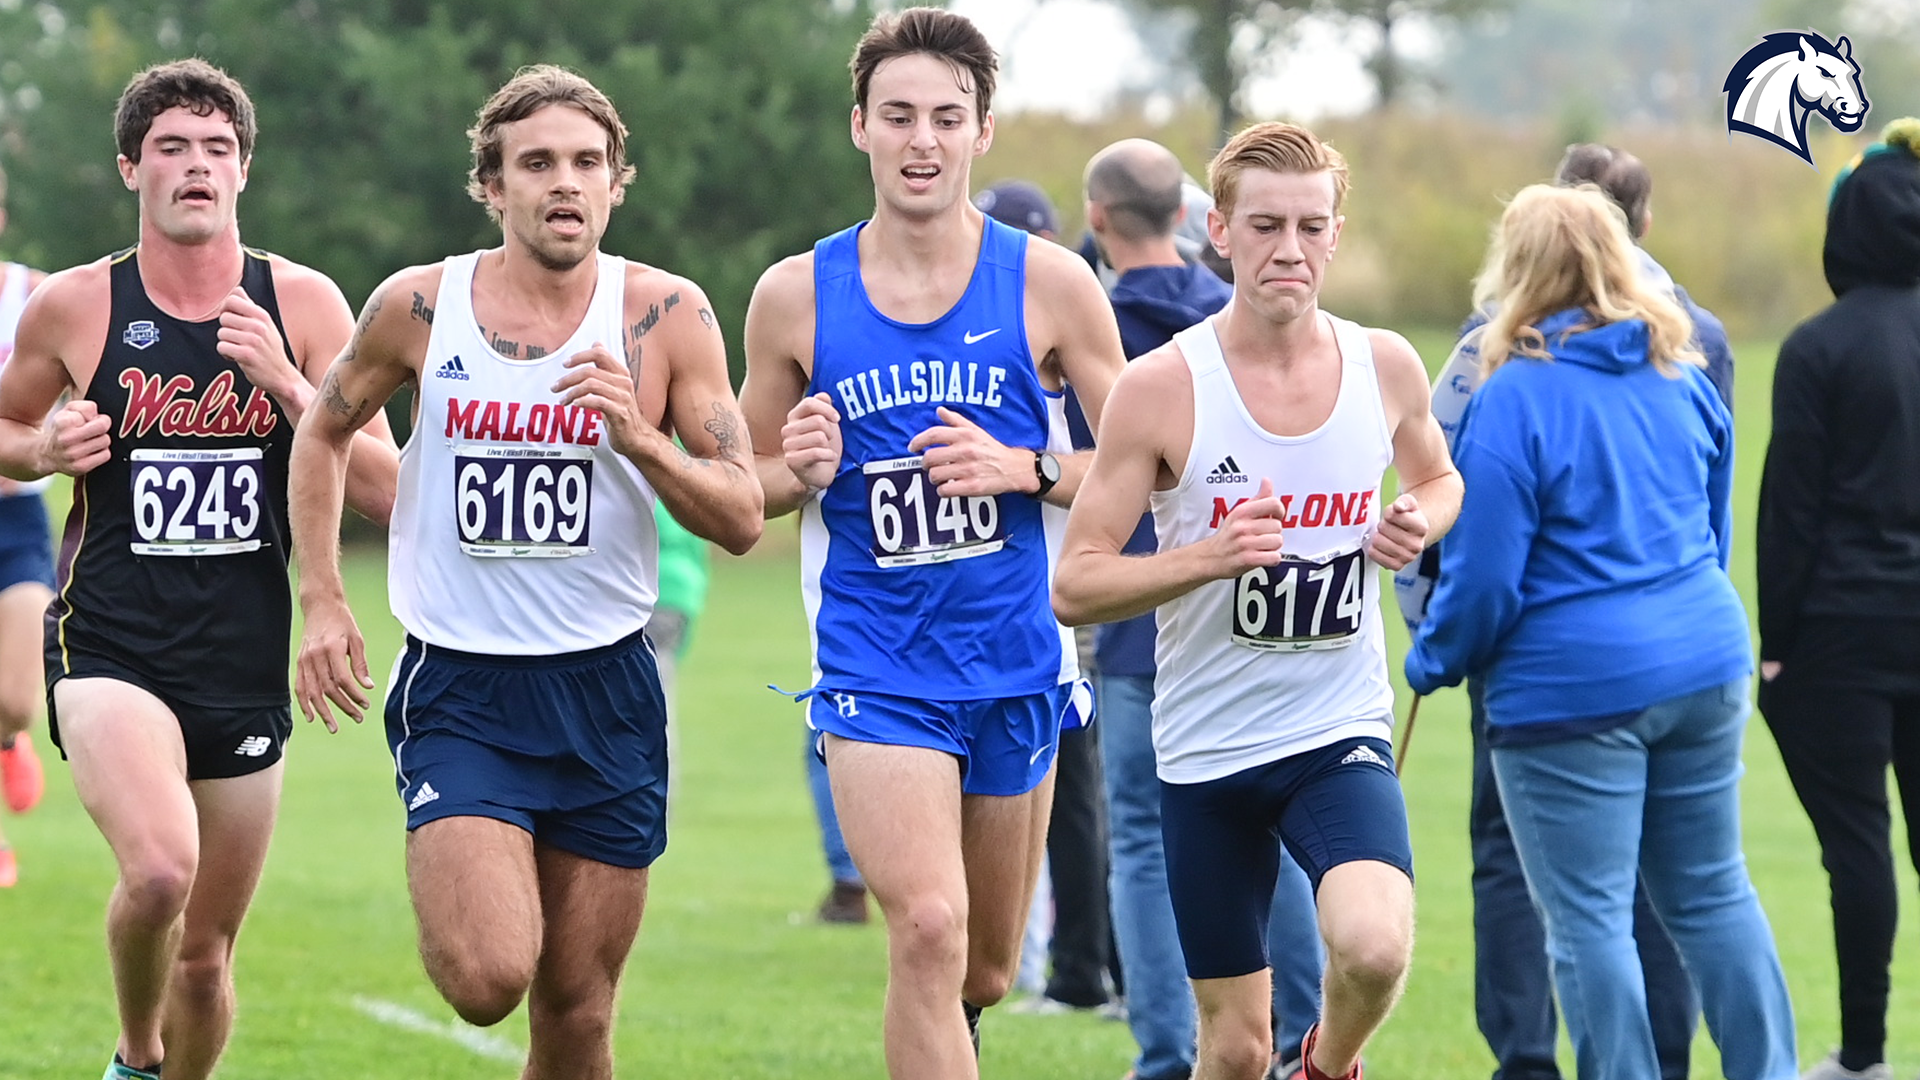 Charger men take ninth at Lucian Rosa Invite